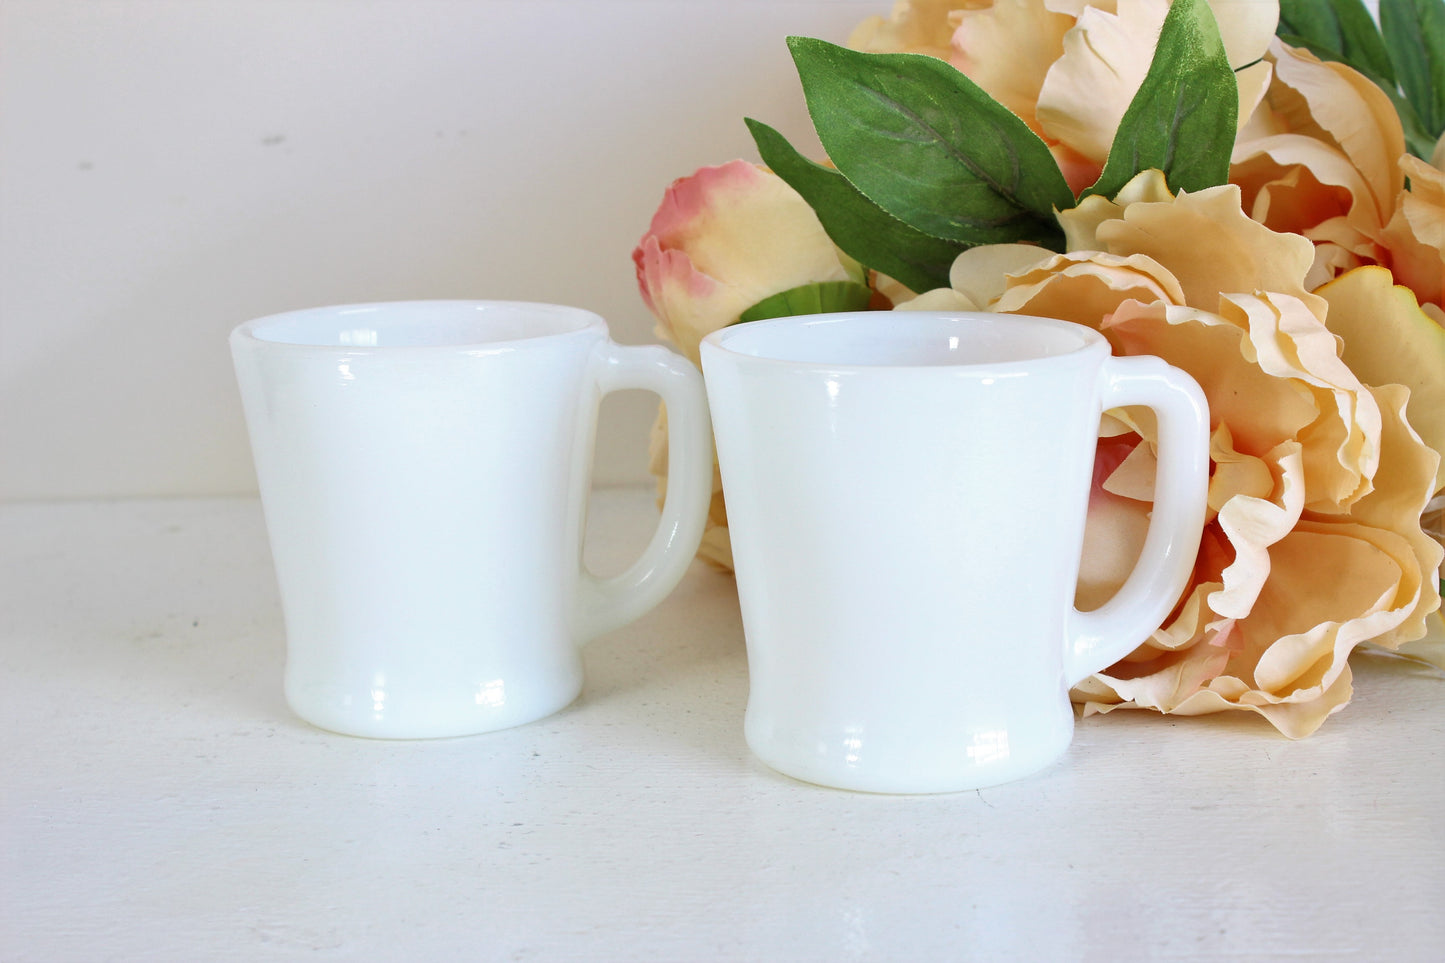 Lot of 4 Vintage White Milk Glass D-Handle Coffee Cups Mugs VGC